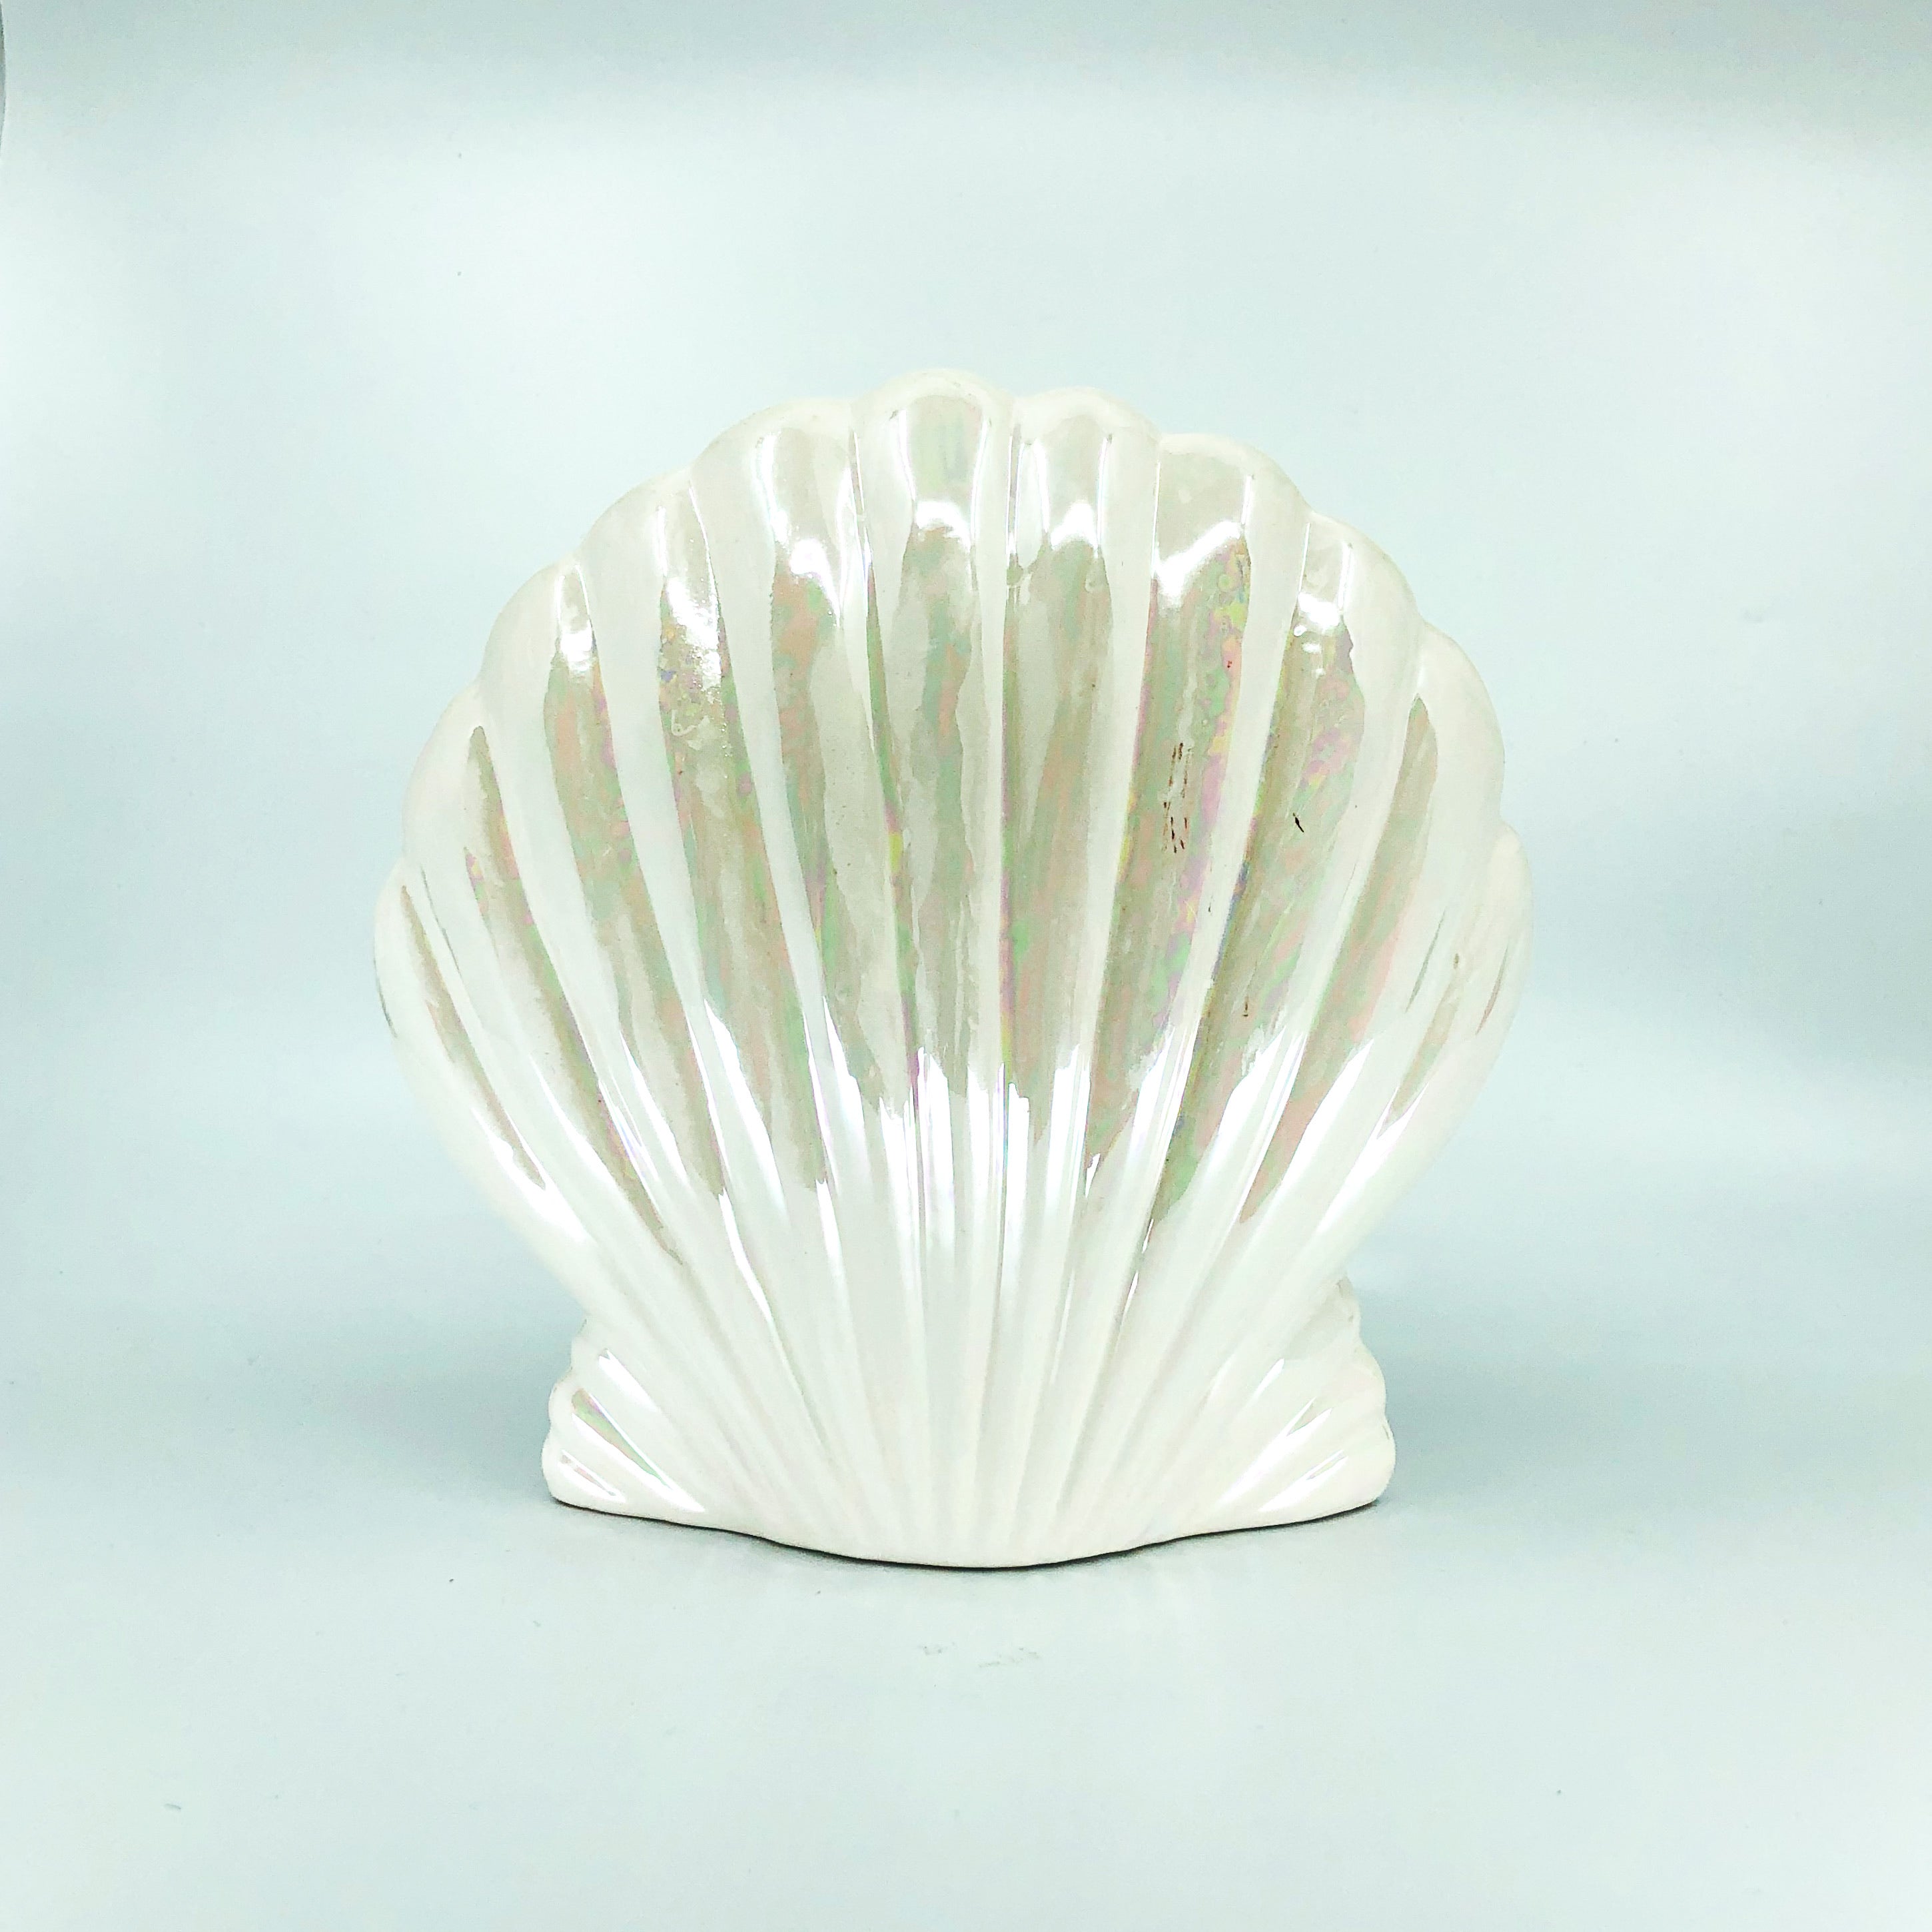 Pearlescent Shell Coin Bank